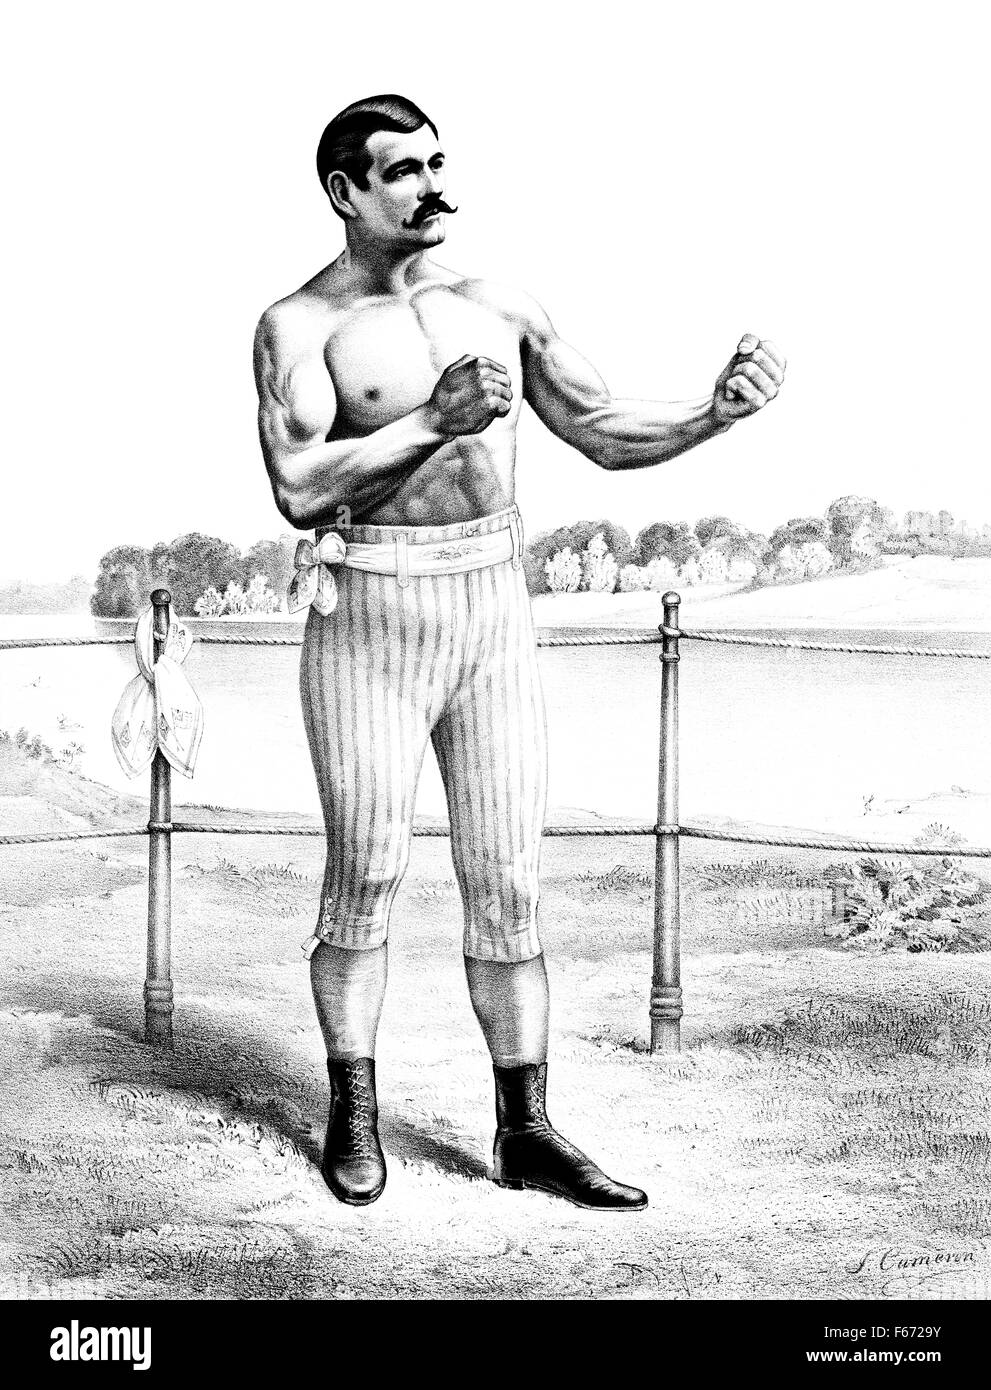 Vintage portrait print of legendary American bare-knuckle and gloved boxer  John L Sullivan (1858 - 1918). Sullivan, nicknamed "The Boston Strong Boy",  is generally regarded as the last bare-knuckle World Heavyweight Champion